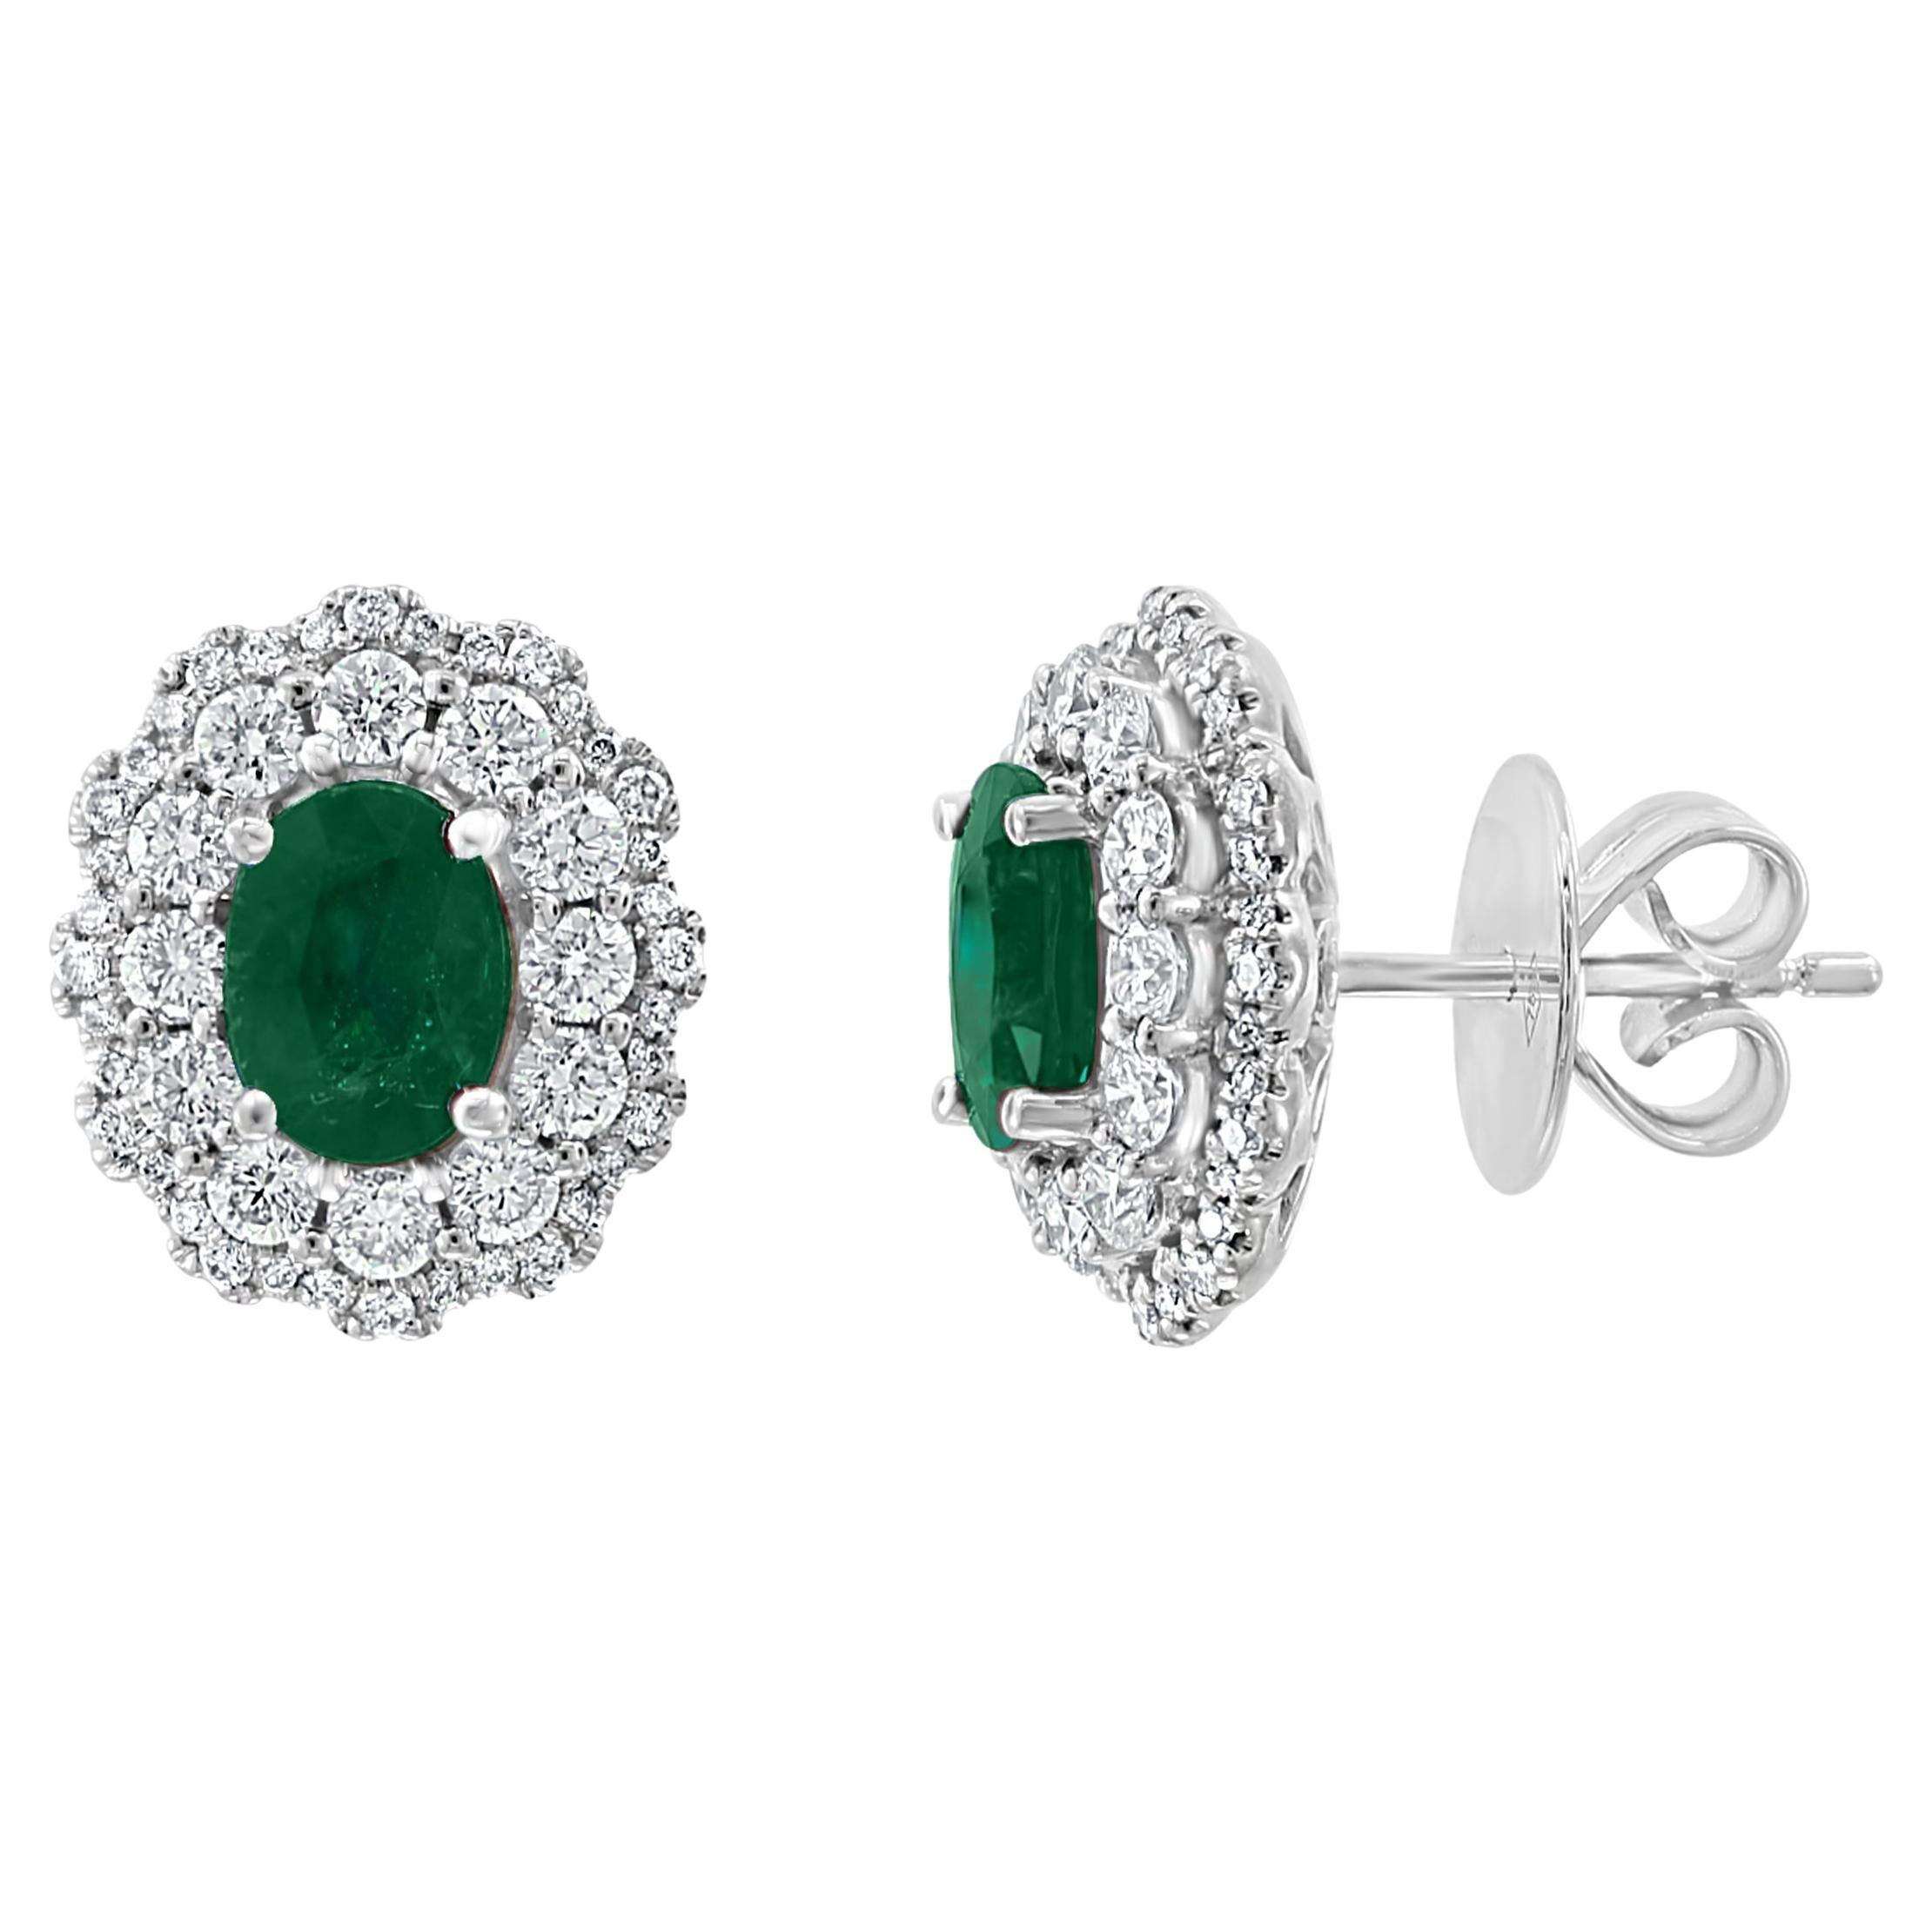 1.34 Carat Oval Cut Emerald and Diamond Halo Stud Earrings in 18K White Gold